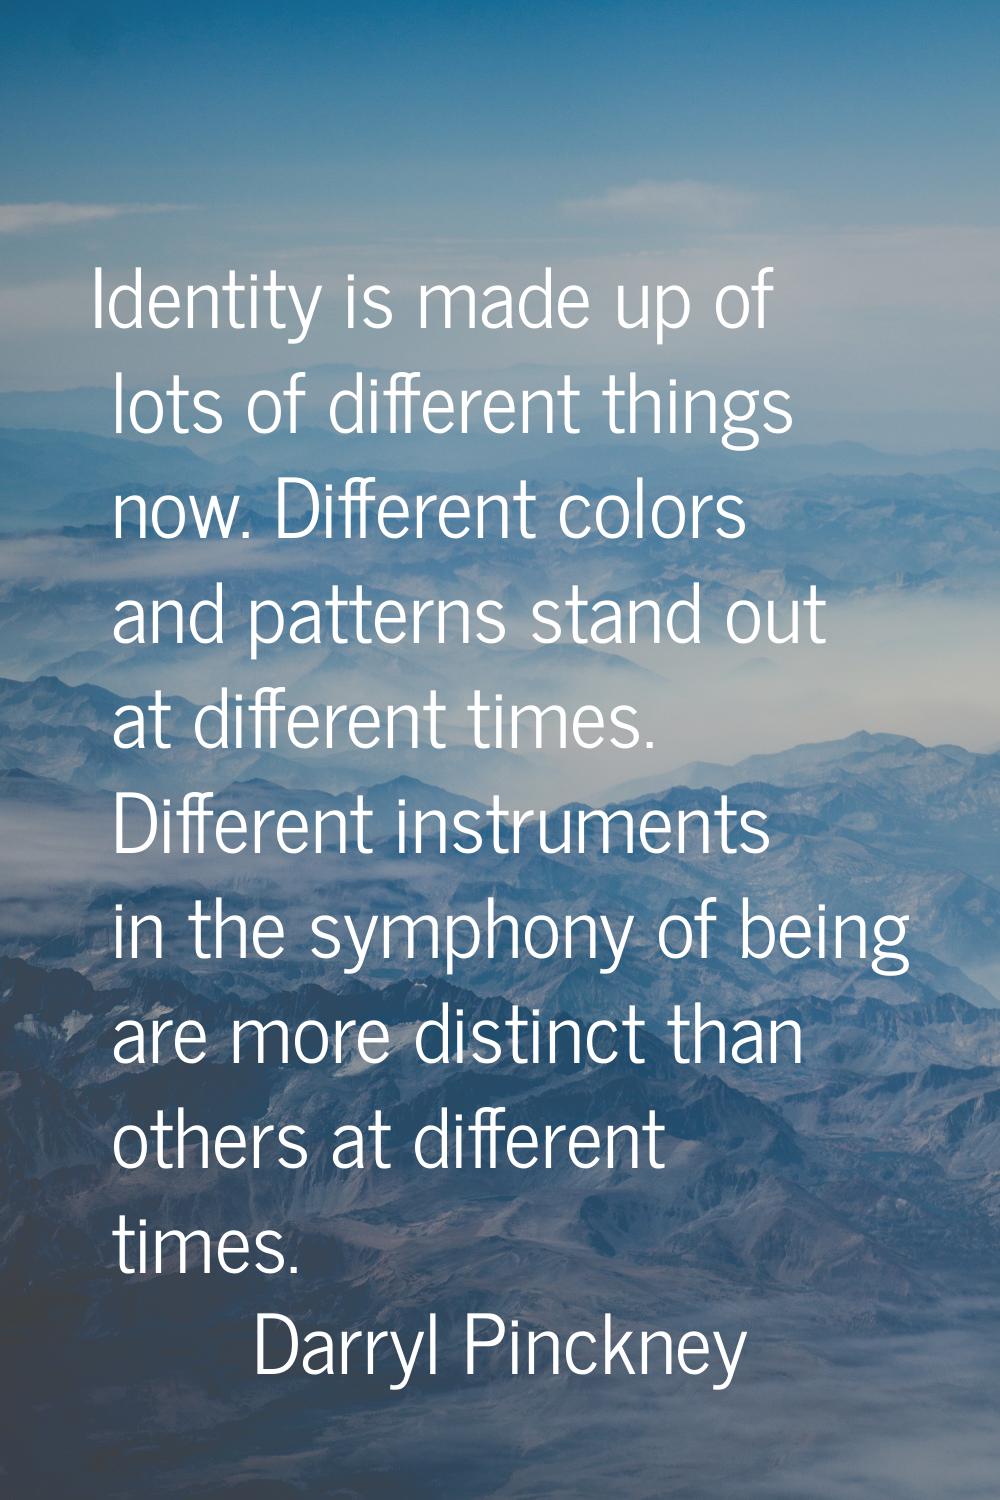 Identity is made up of lots of different things now. Different colors and patterns stand out at dif